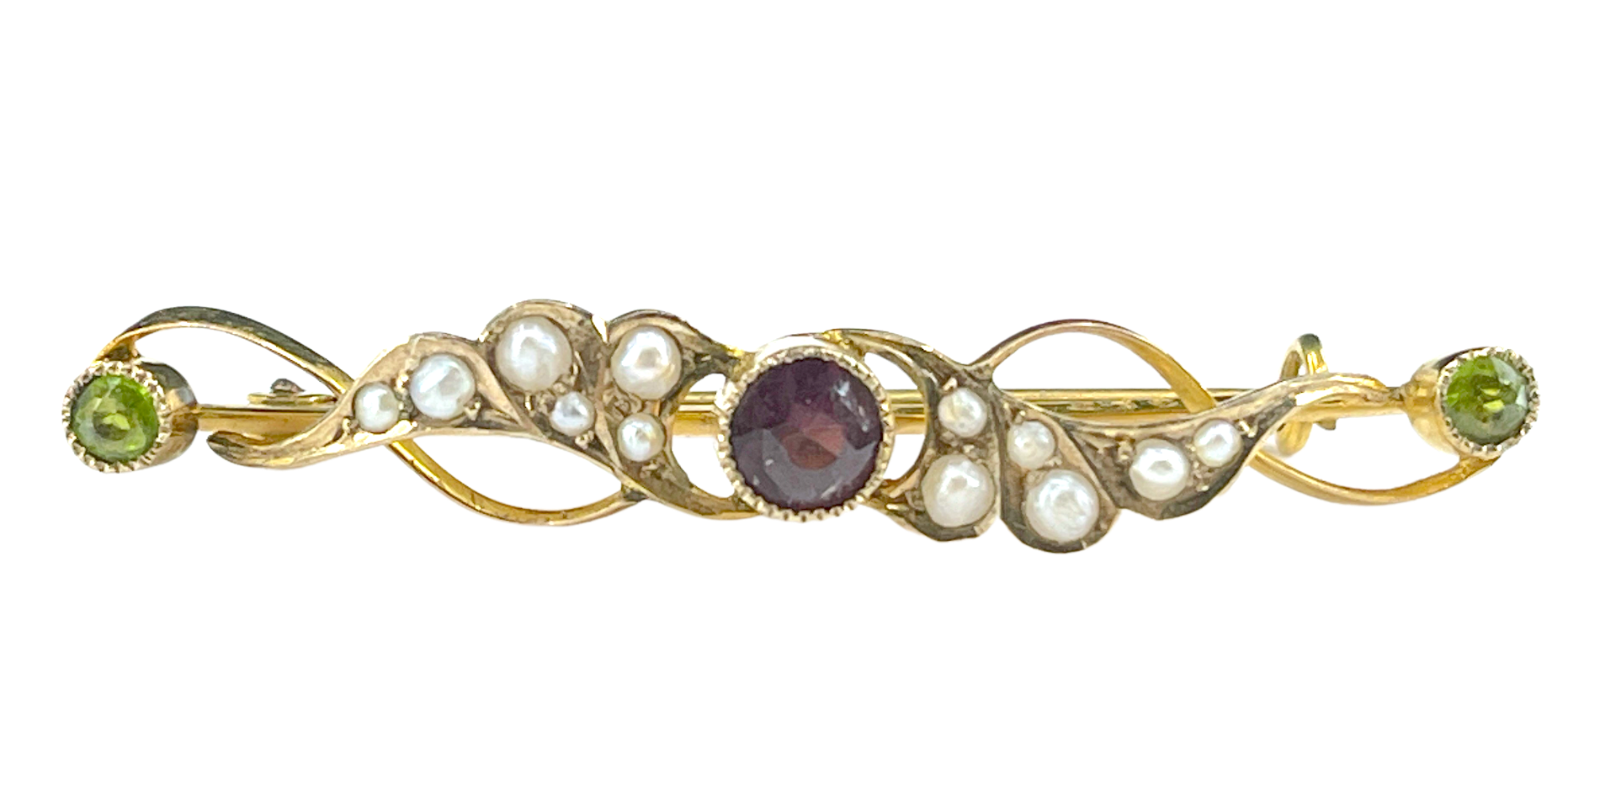 Art Nouveau Era antique A whimsical Suffragette brooch set with amethyst, peridot & seed pearls in 9ct gold